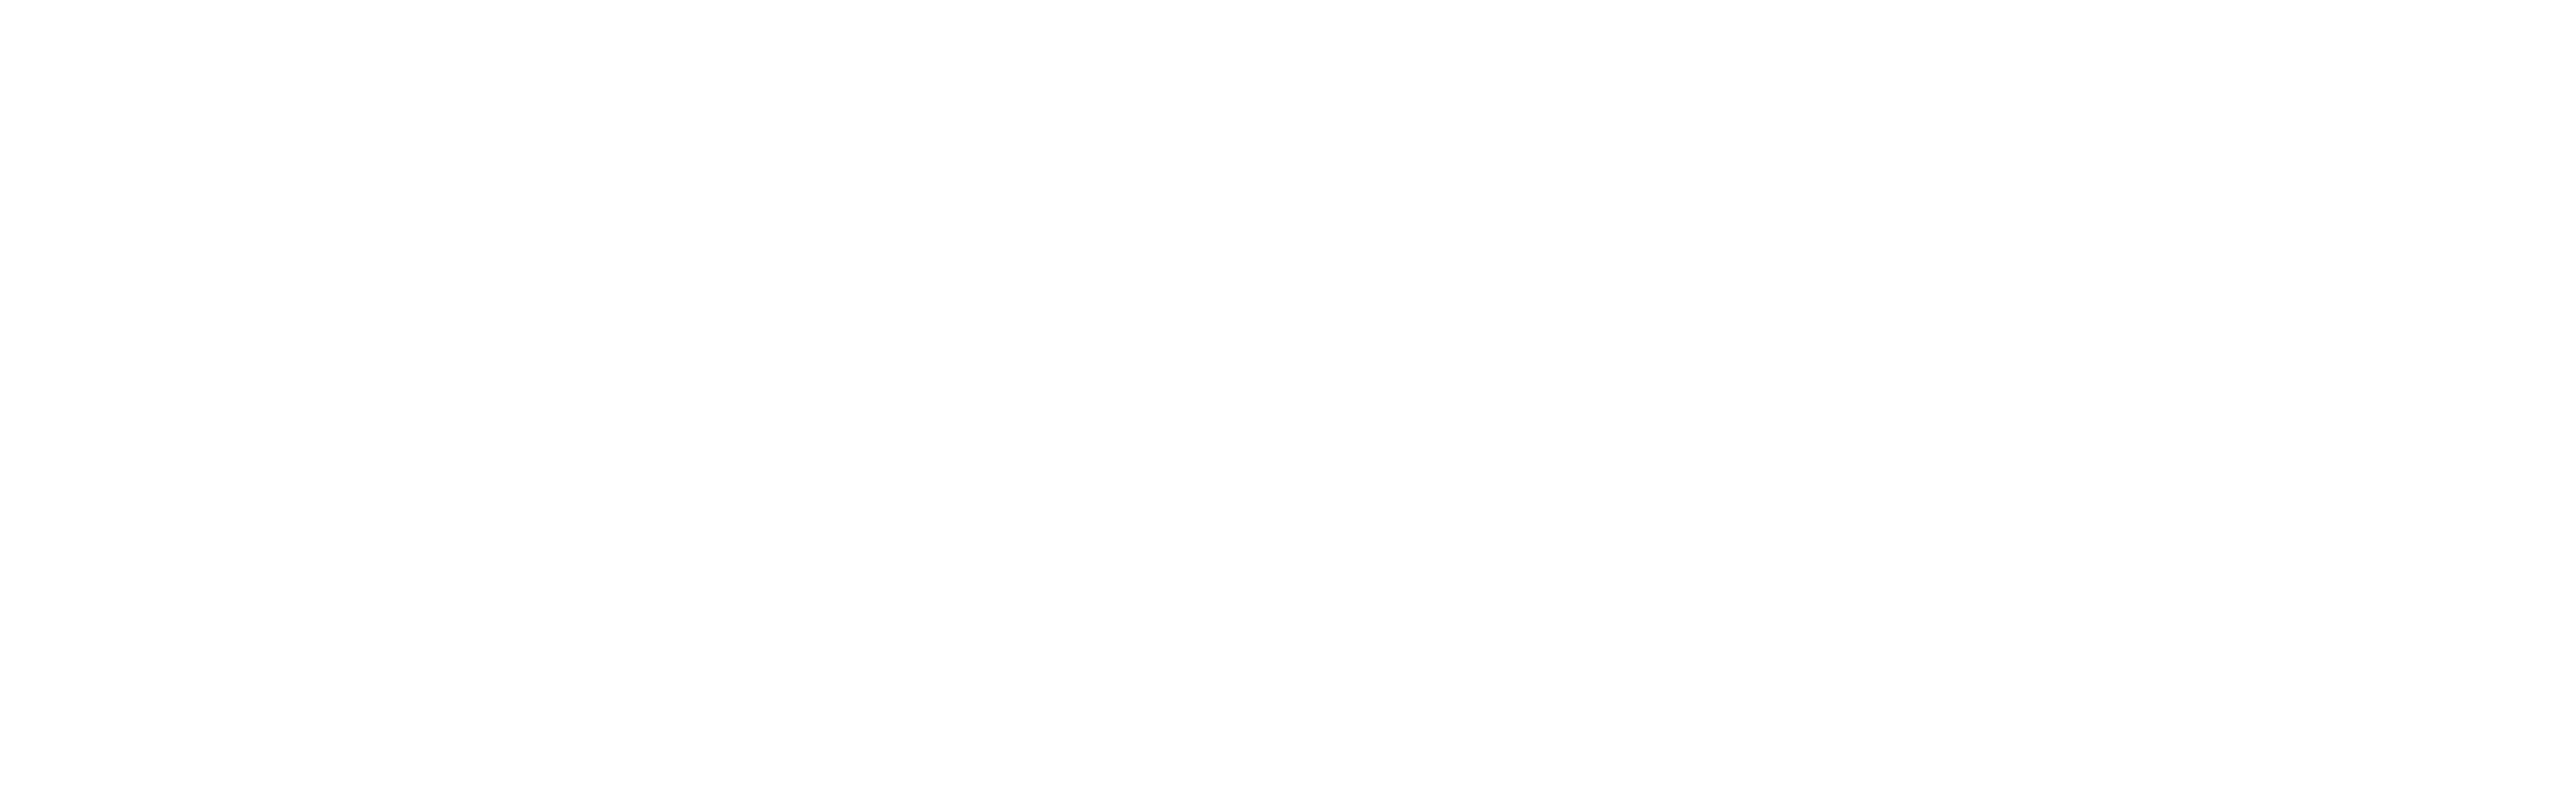 The Reluctant Traveler with Eugene Levy logo